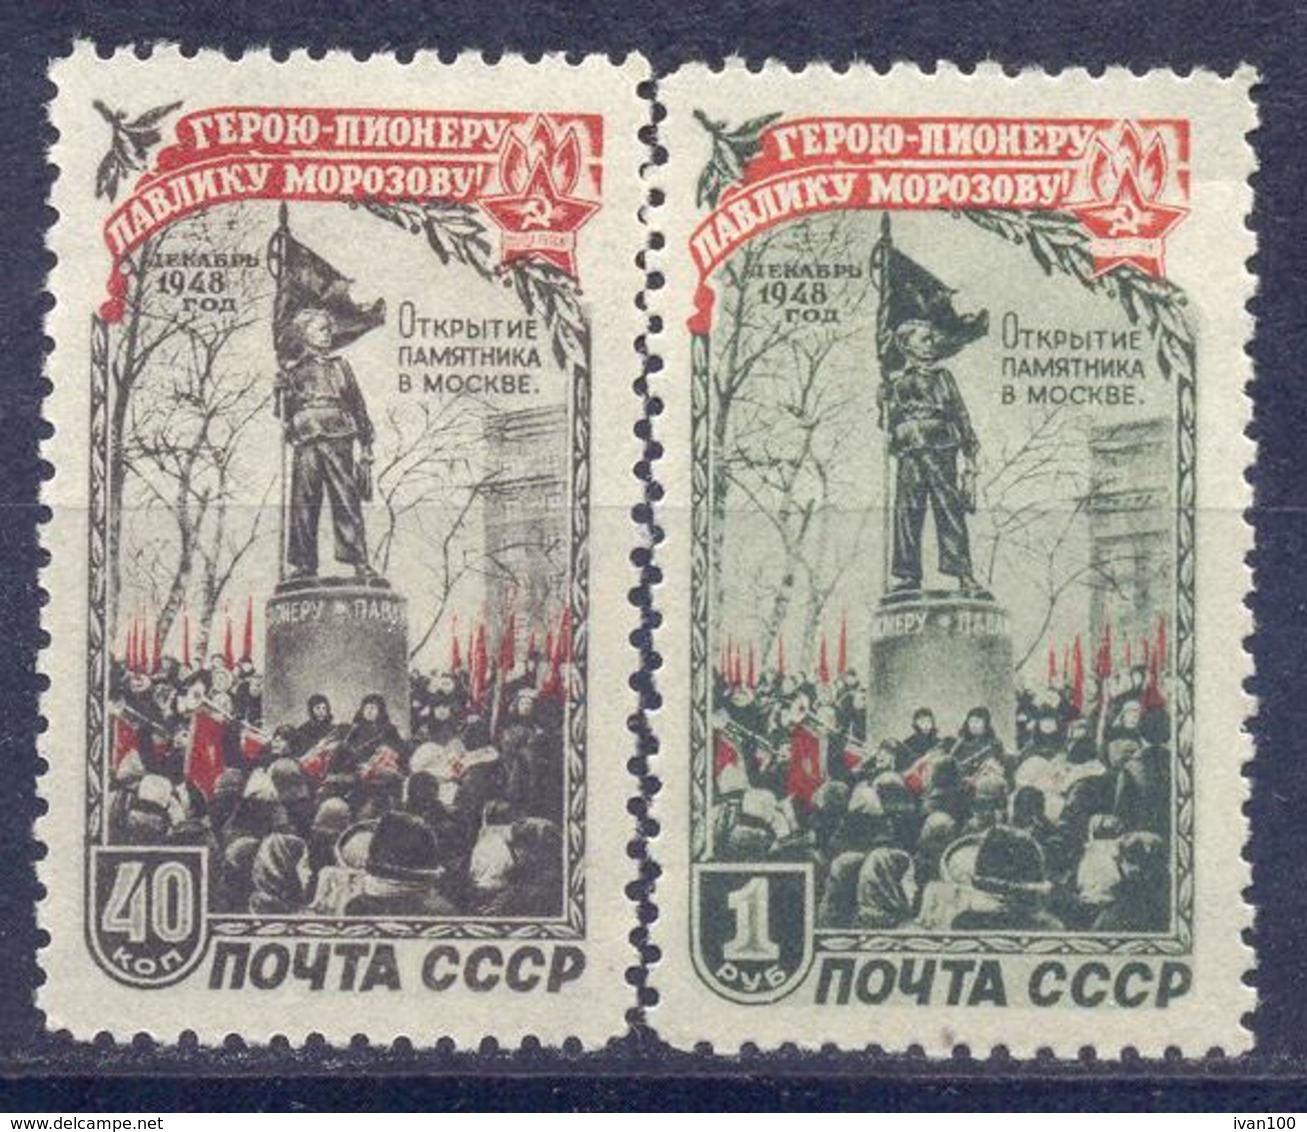 1950. USSR/Russia, Unveiling Of Monument To Pavlik Morosov, Mich.1448/49, 2v, Mint/* - Unused Stamps